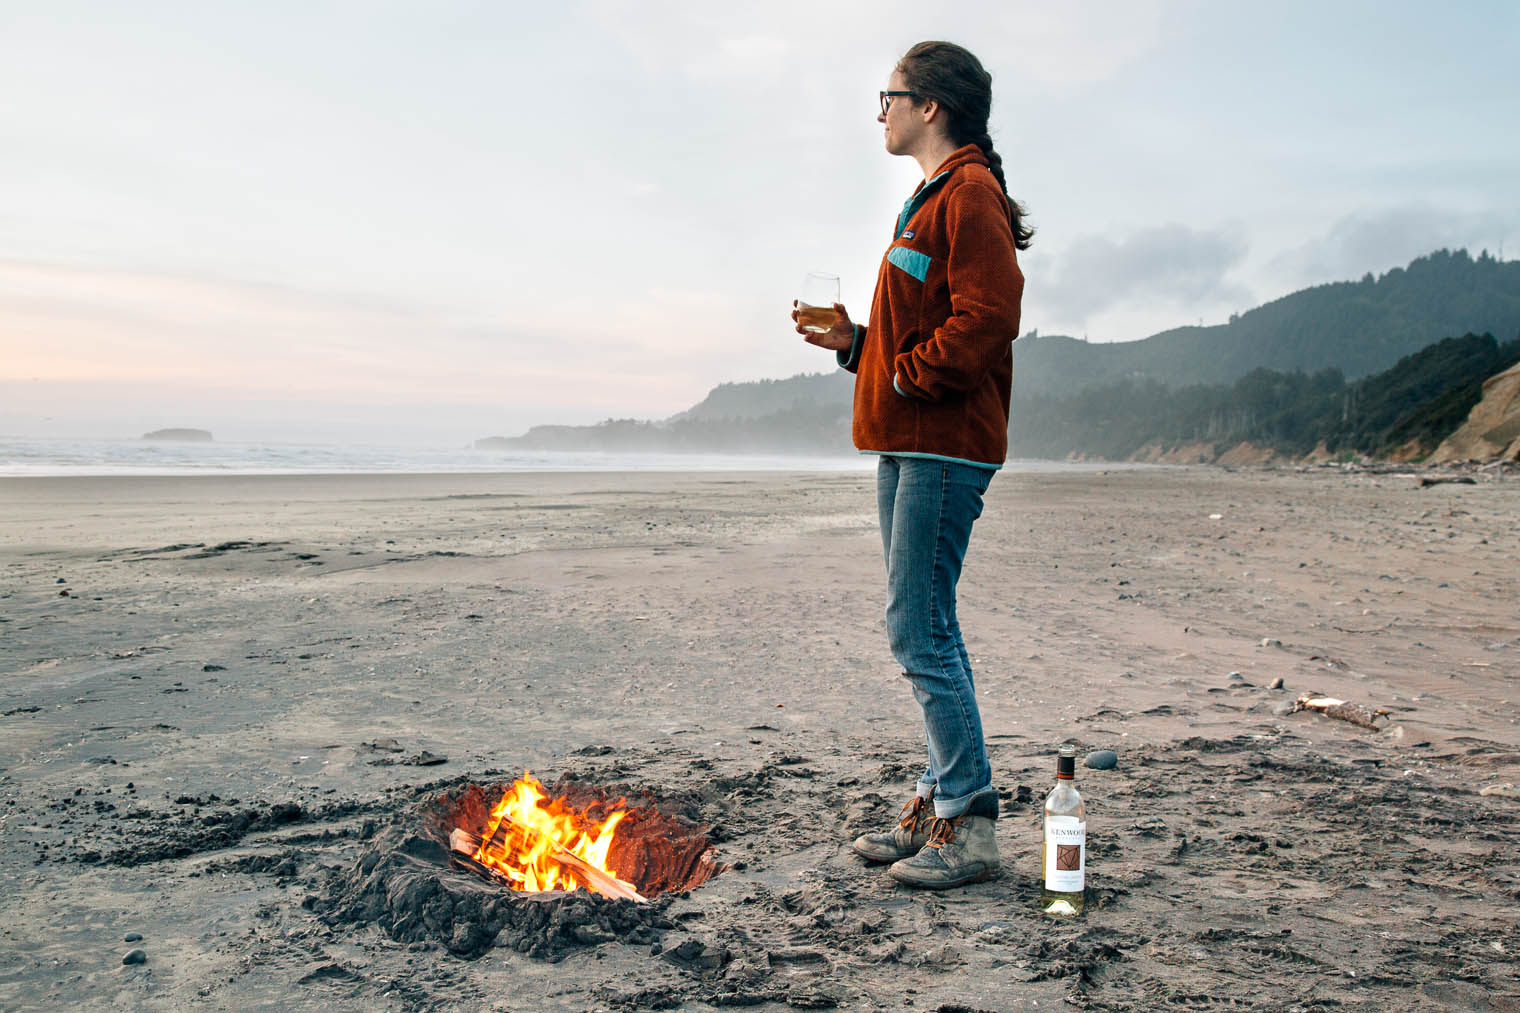 Megan standing in front of a bonfire on the beach along the Oregon Coast